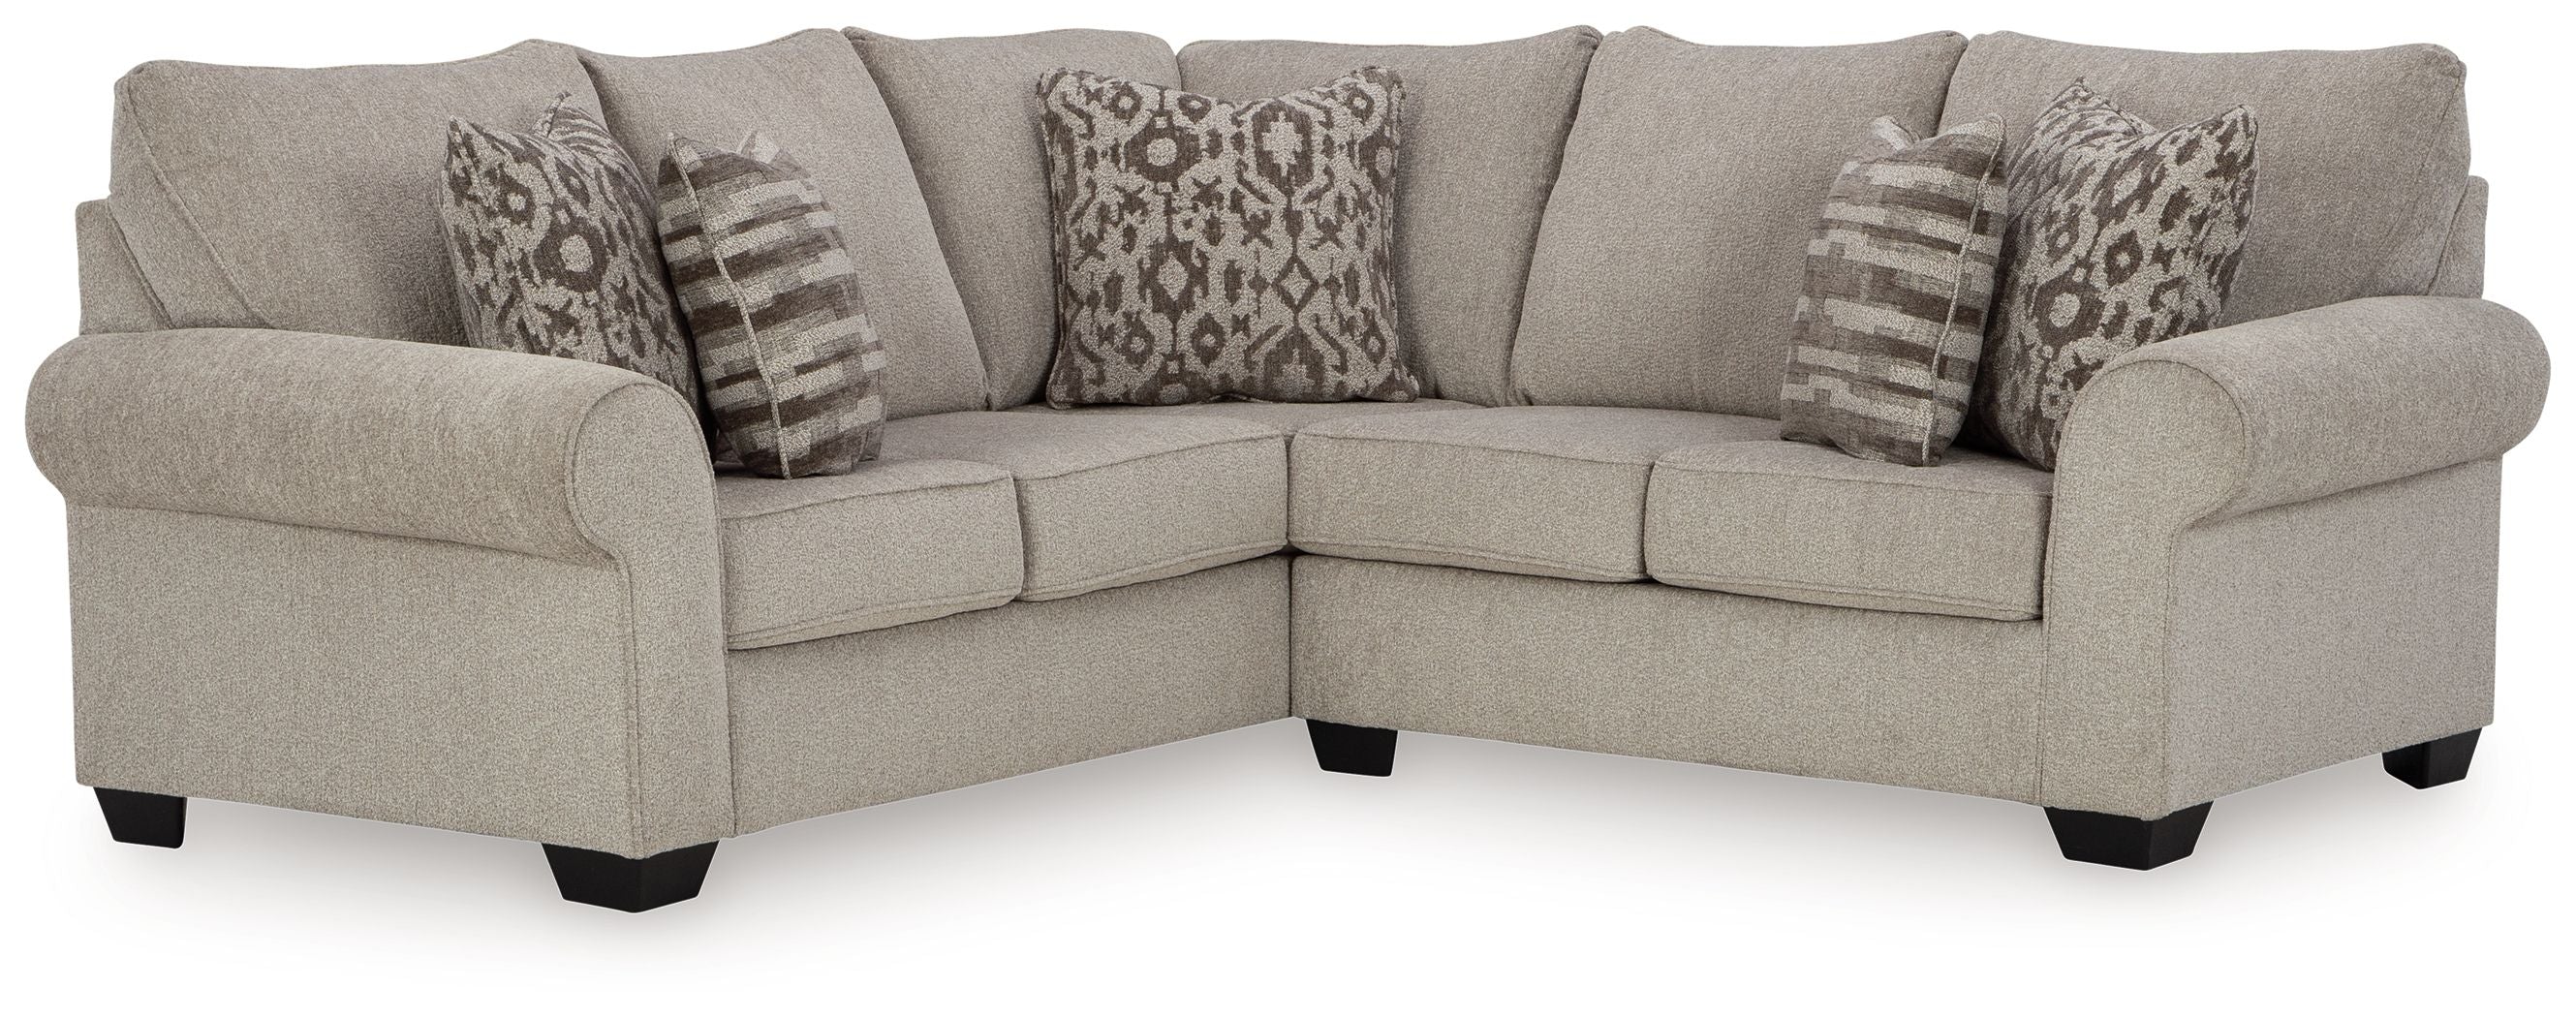 Claireah Farmhouse Fabric Brown Sectional